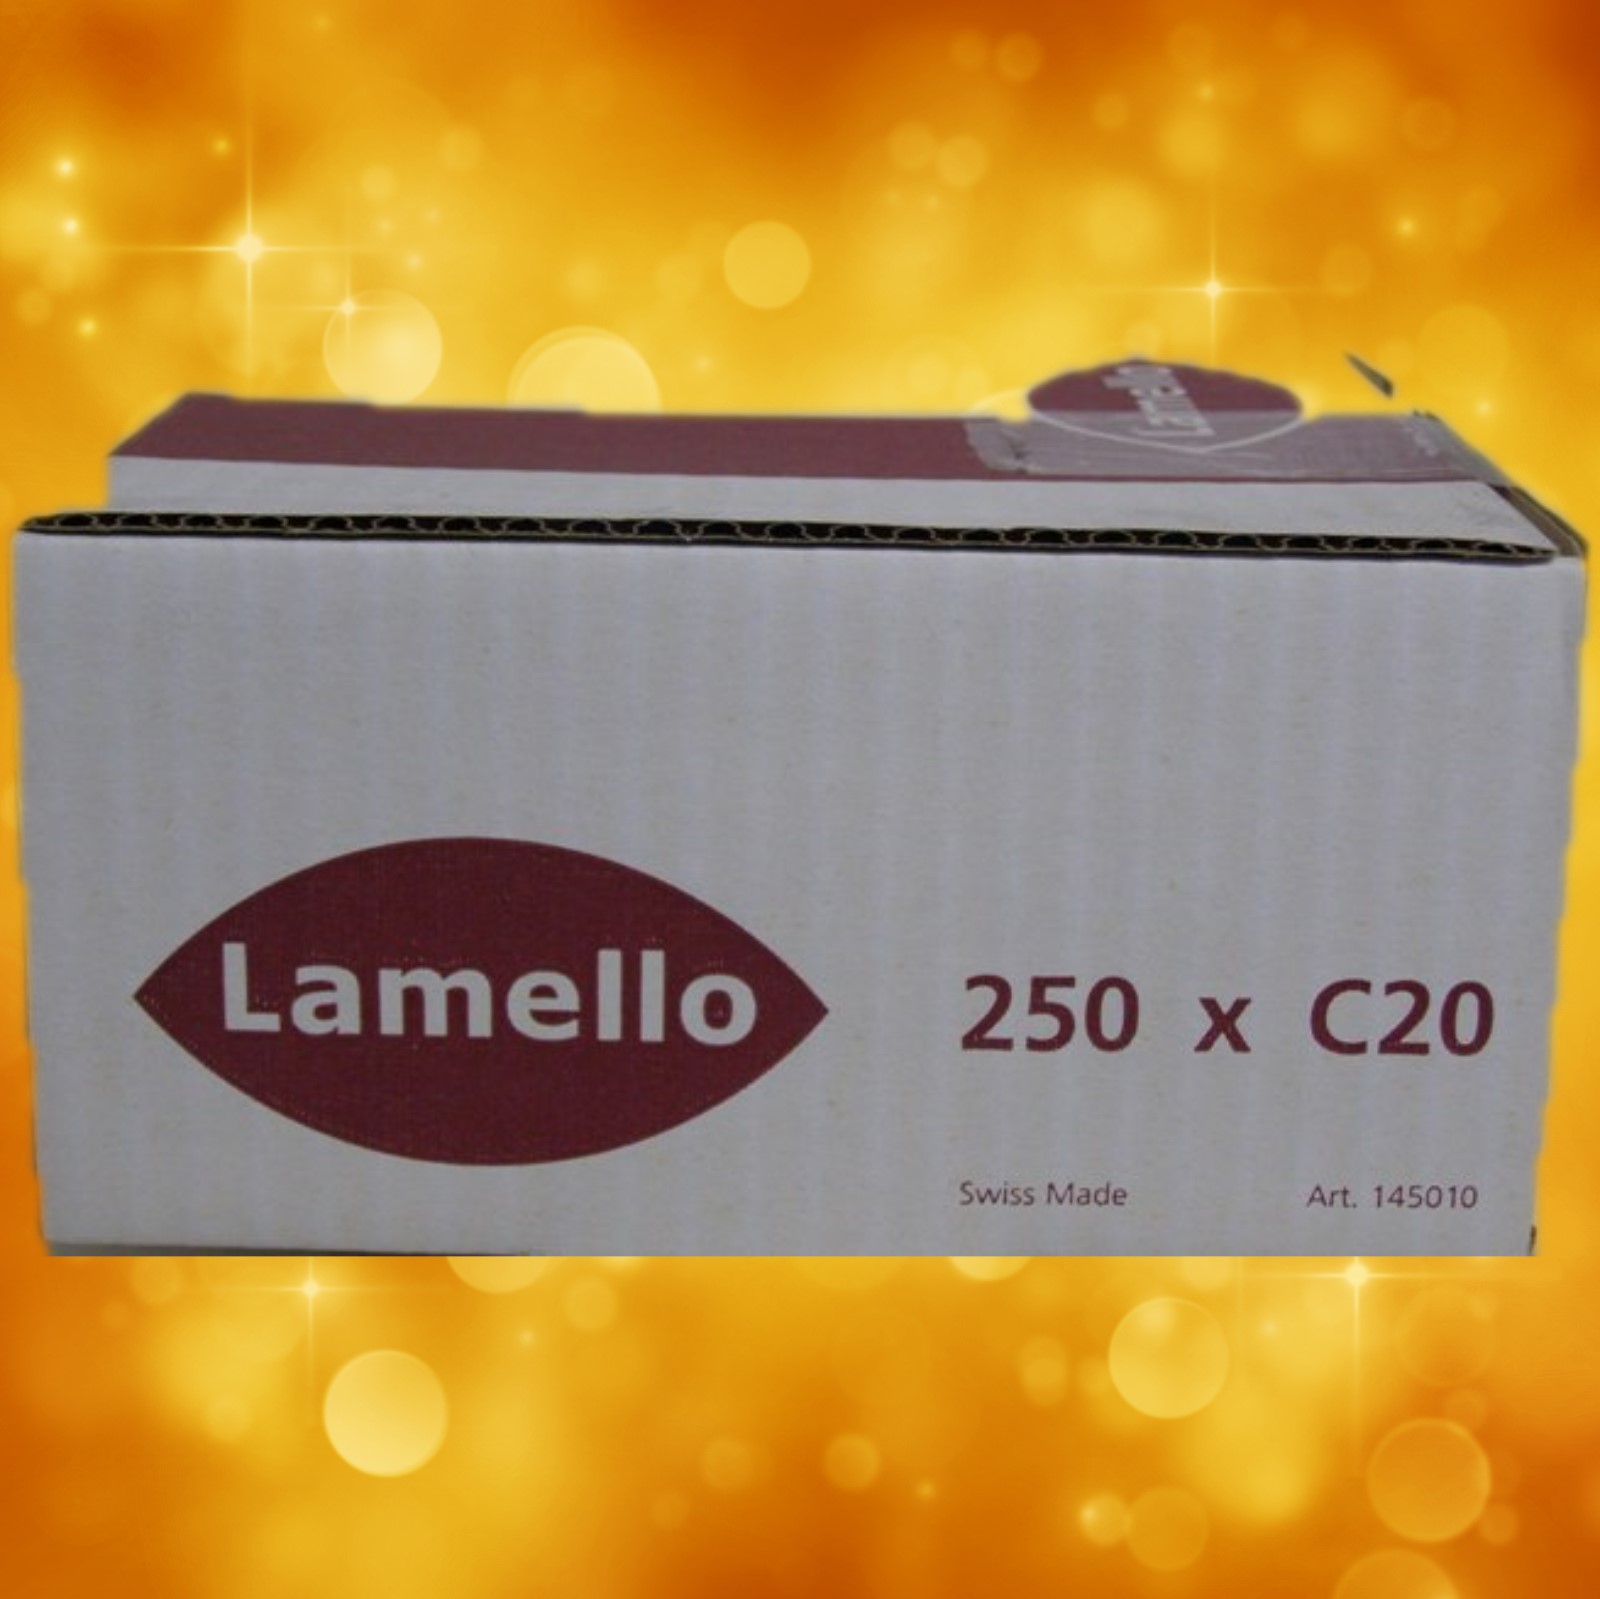 Lamello Solid Surface Biscuits C-20 Box of 250
145010